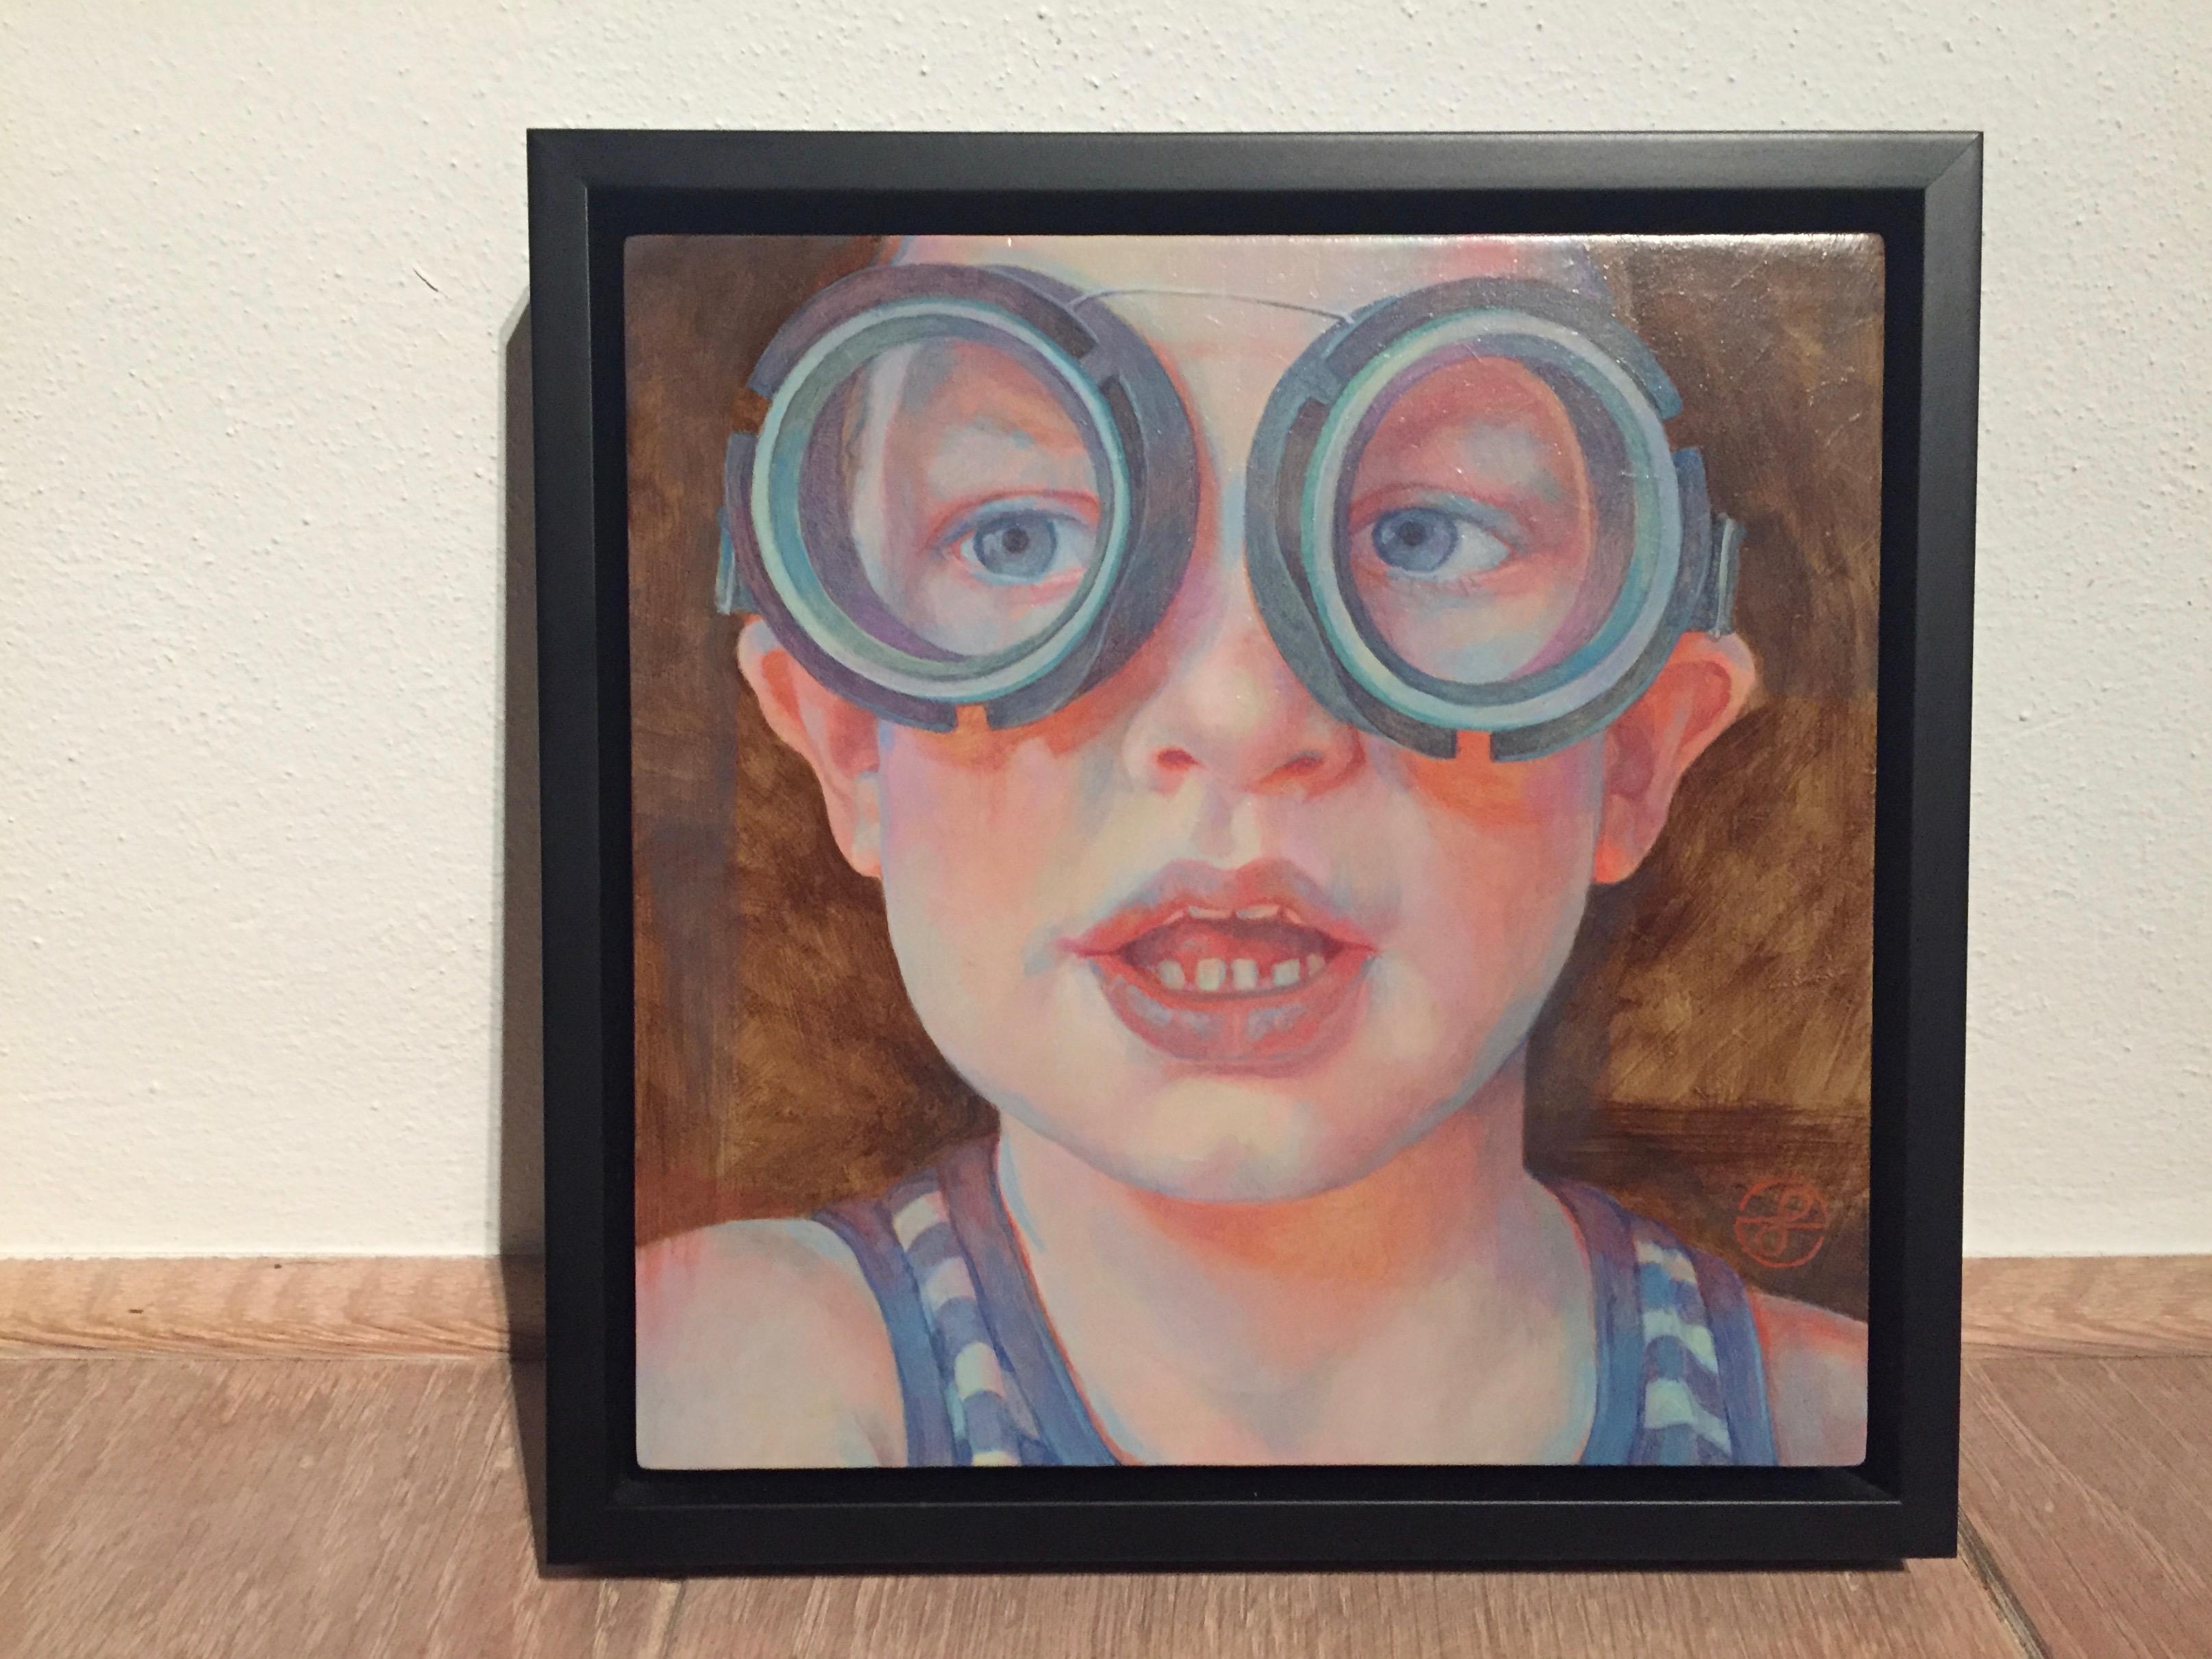 Diving Glasses I- 21st Century Contemporary Portrait Painting of a Boy 2